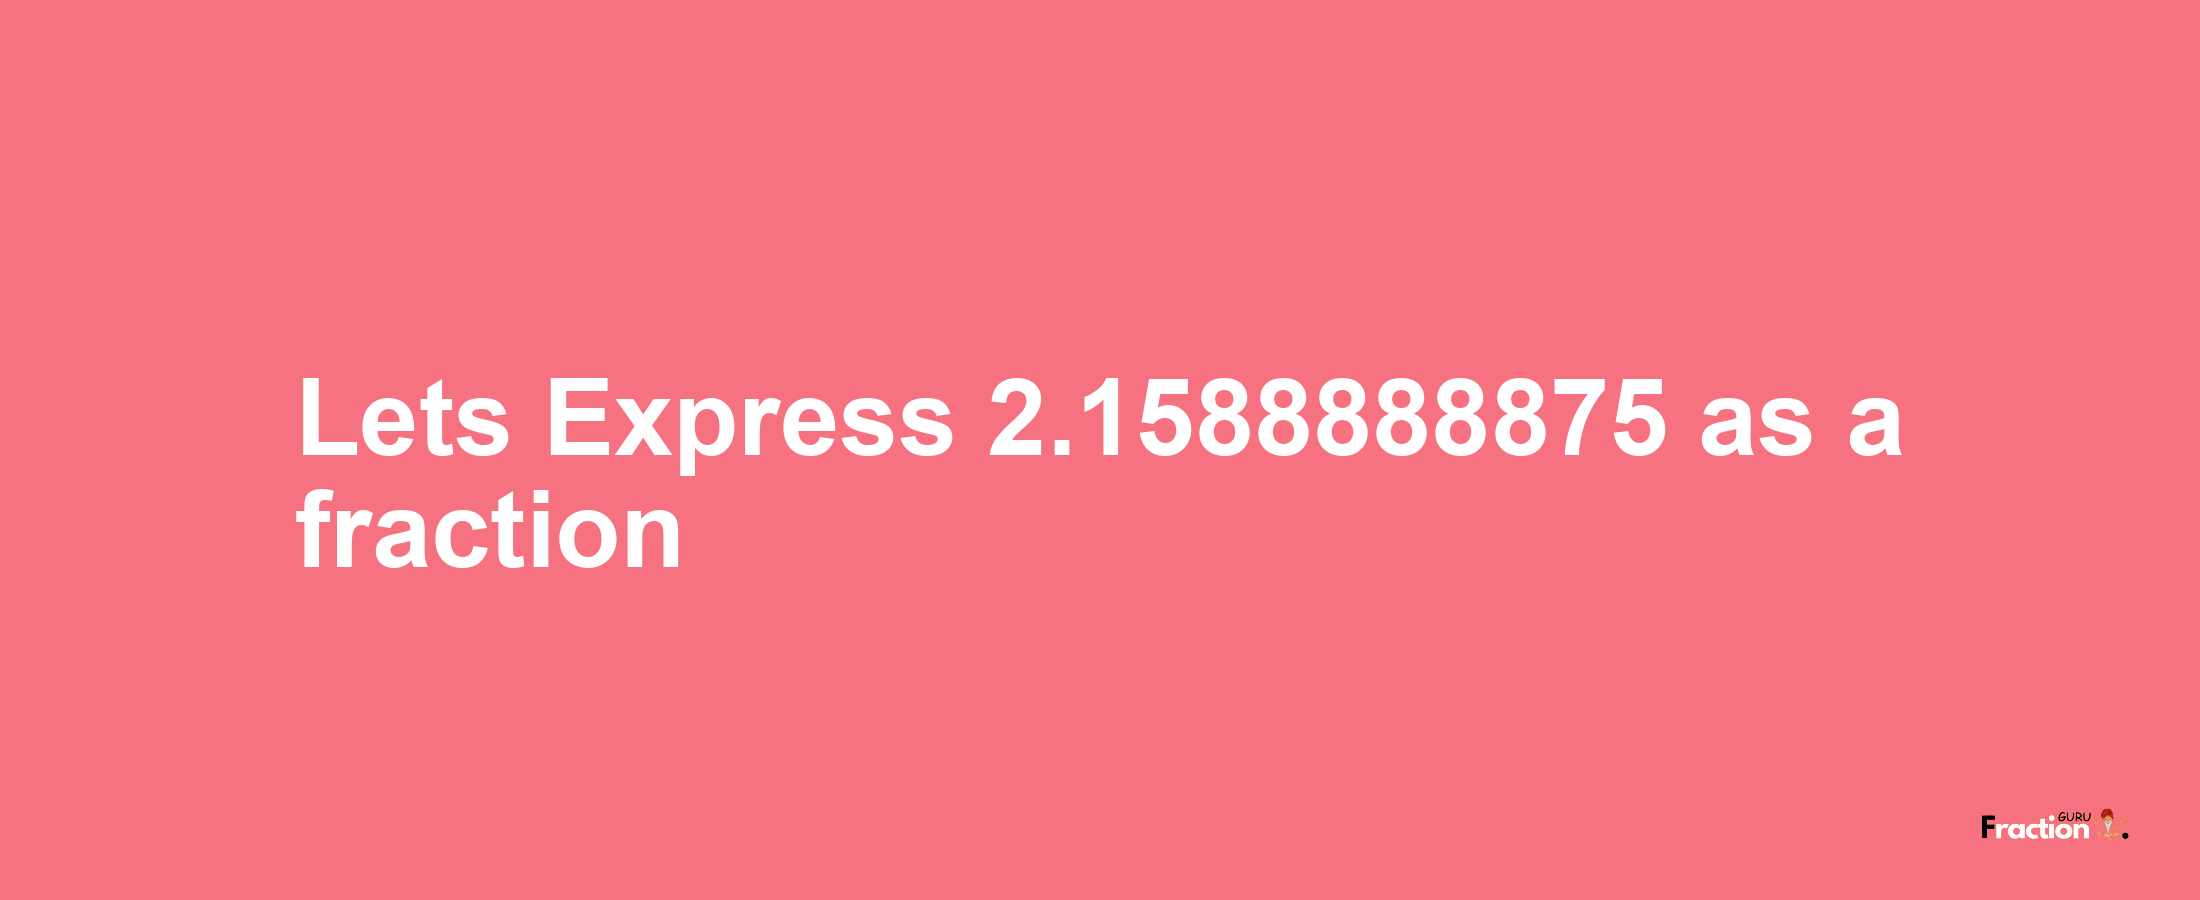 Lets Express 2.1588888875 as afraction